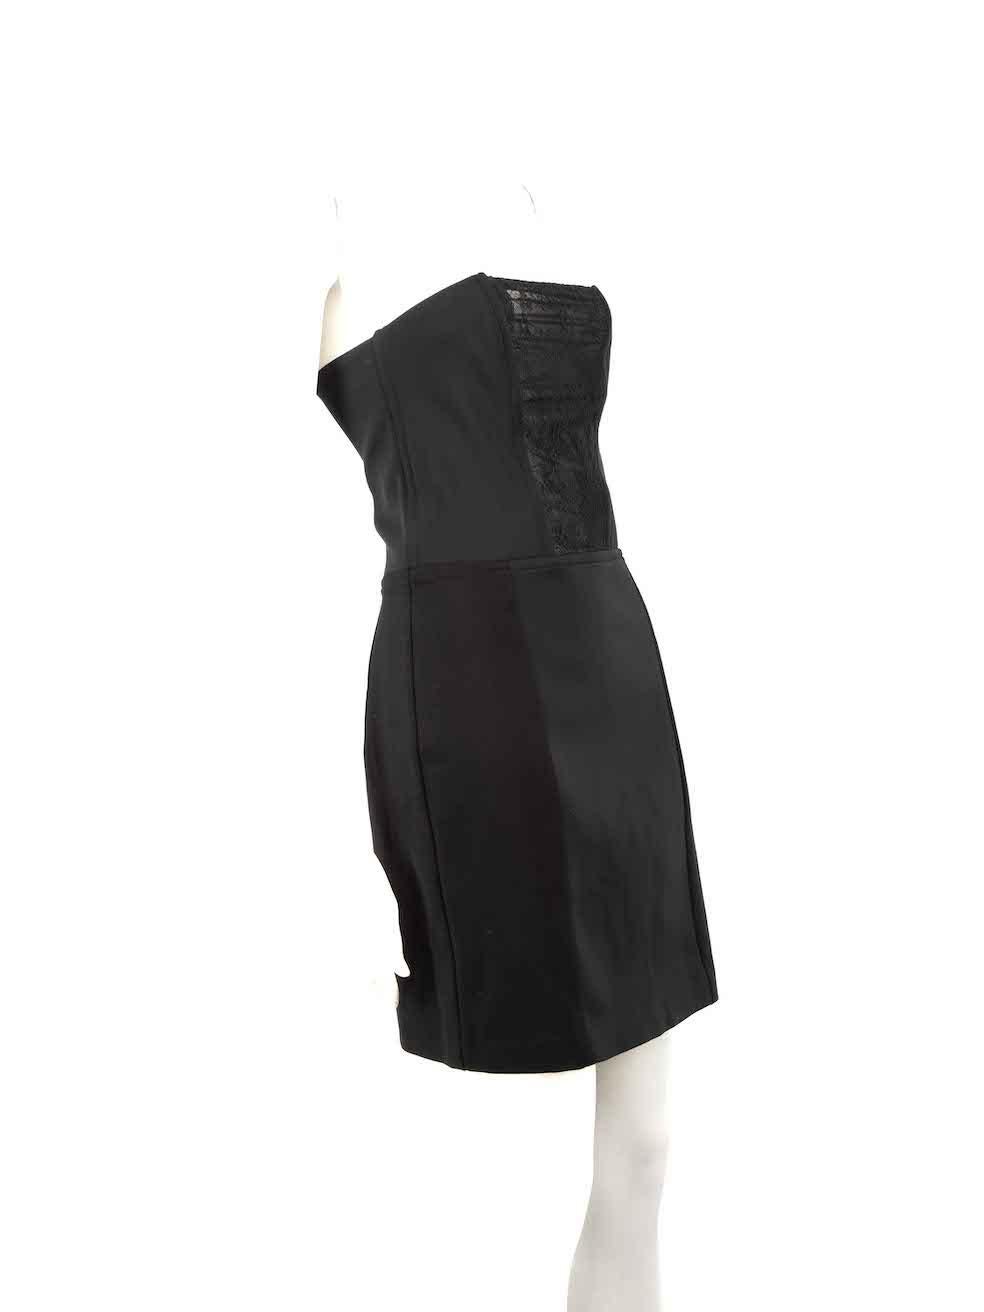 CONDITION is Very good. Minimal wear to dress is evident. Some small marks to the front of the dress near hem on this used Maje designer resale item.
 
 
 
 Details
 
 
 Black
 
 Viscose
 
 Dress
 
 Mini
 
 Font lace panel
 
 Back zip fastening
 
